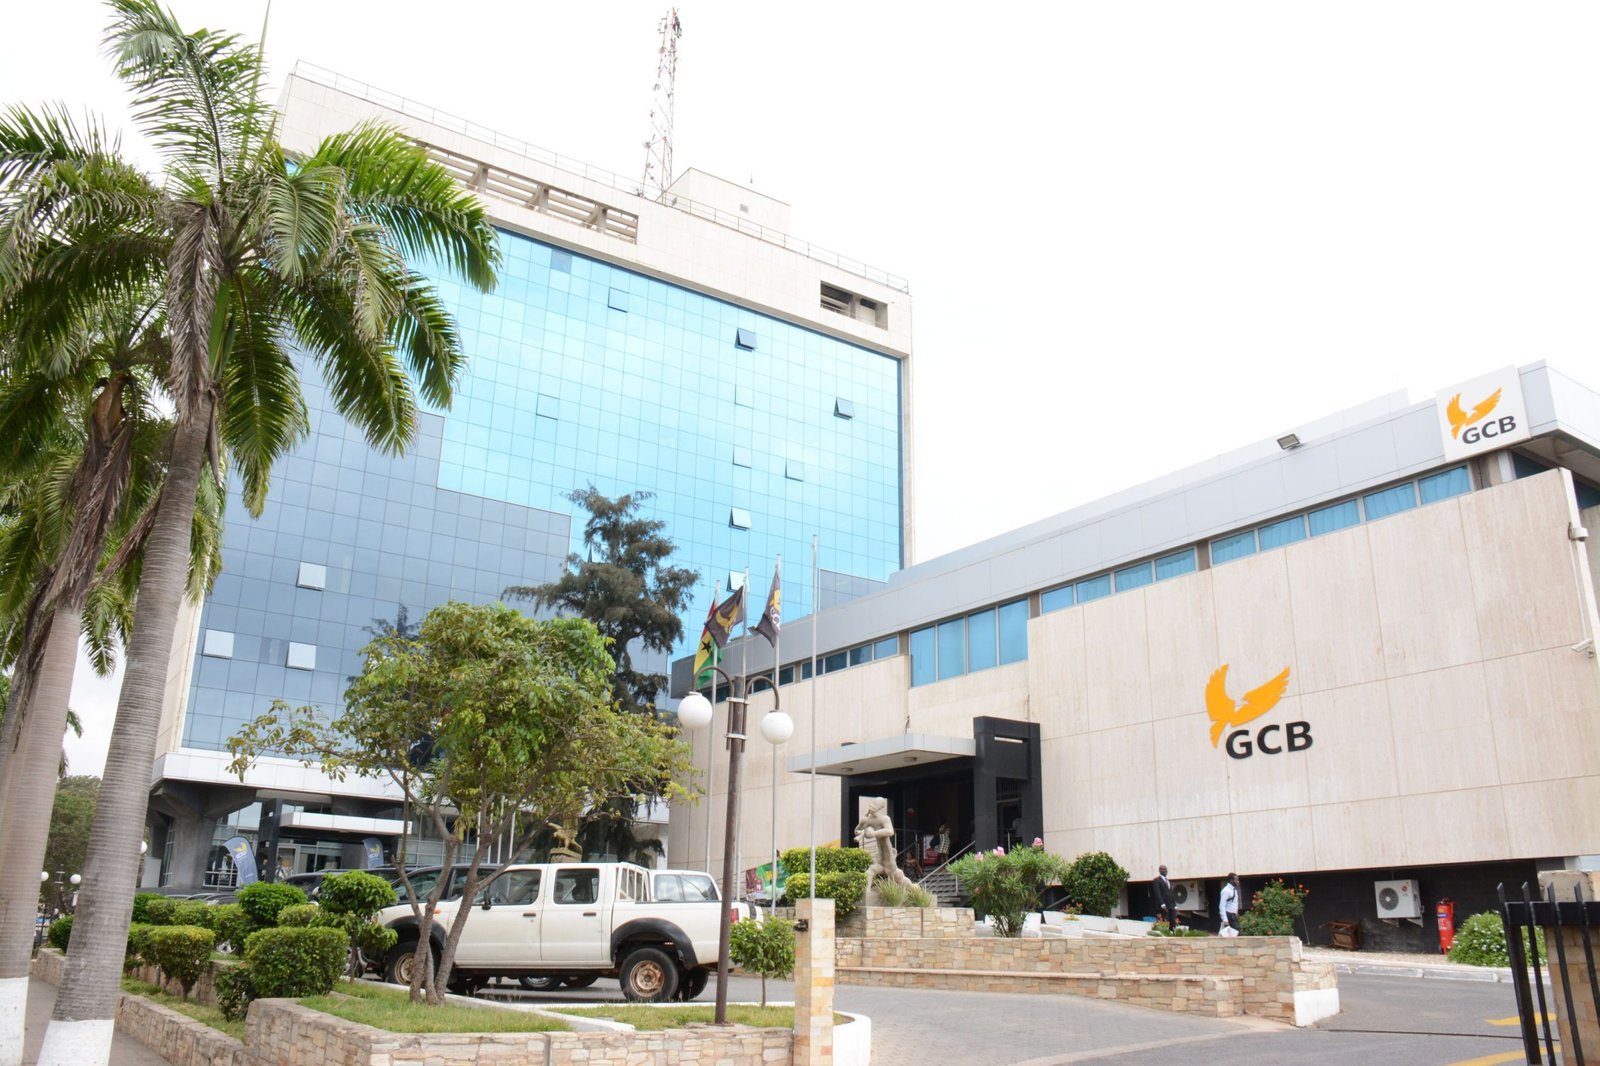 GCB Bank records strong growth in profits in 2021, after a sluggish 2020